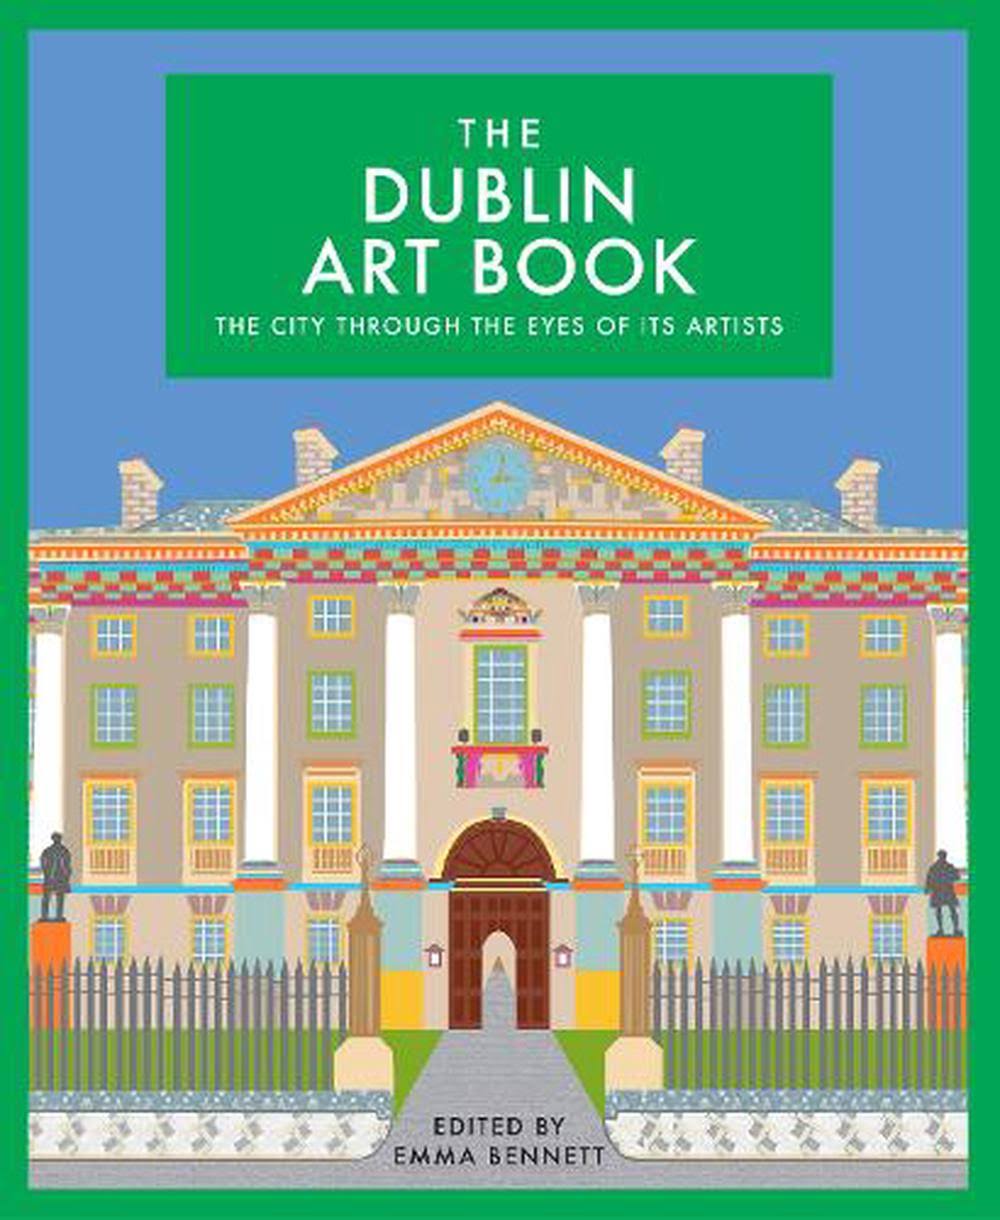 The Dublin Art Book: The City Through the Eyes of Its Artists [Book]